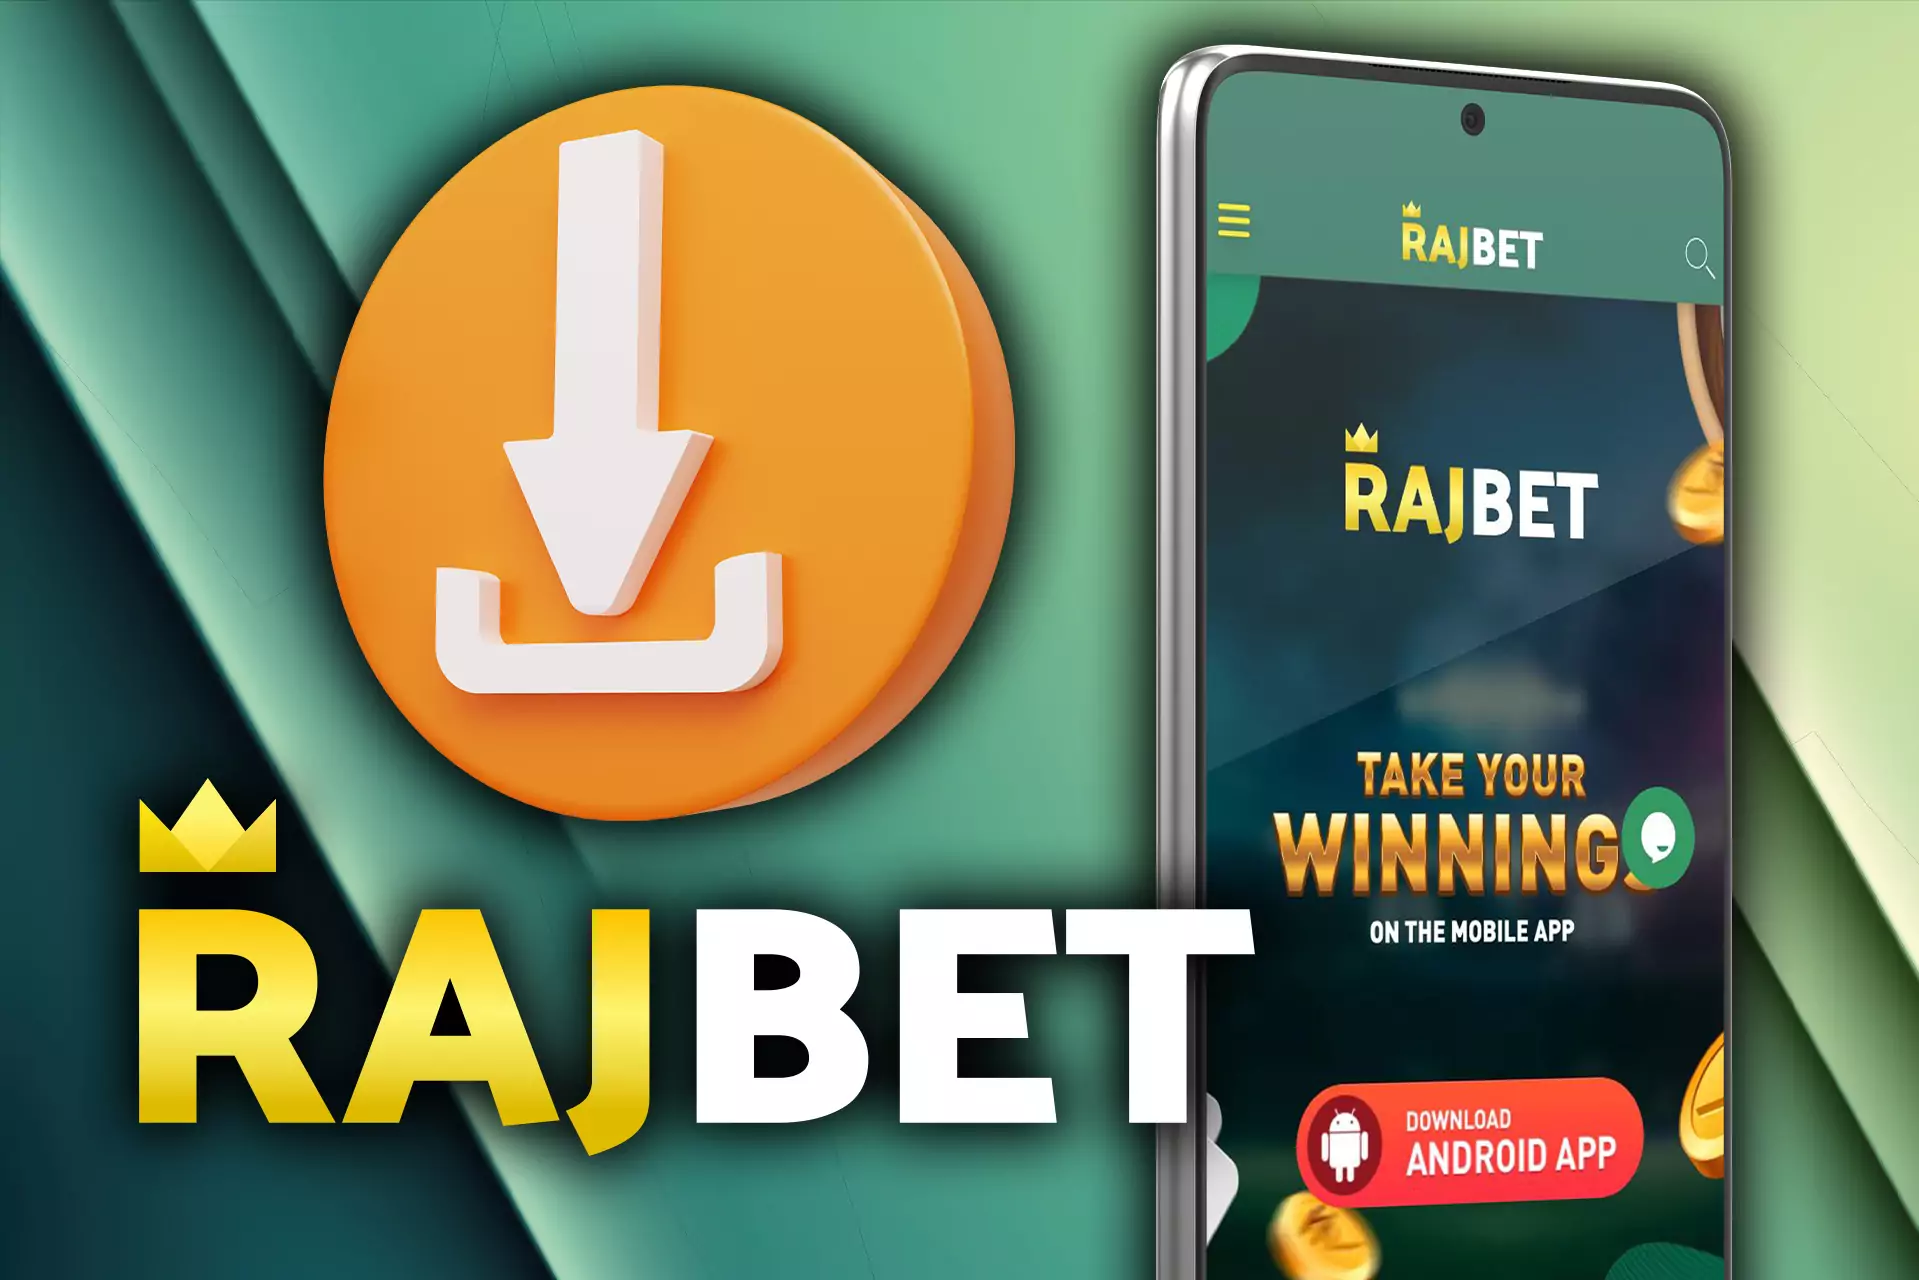 Download Rajbet APK for Android from the official website.